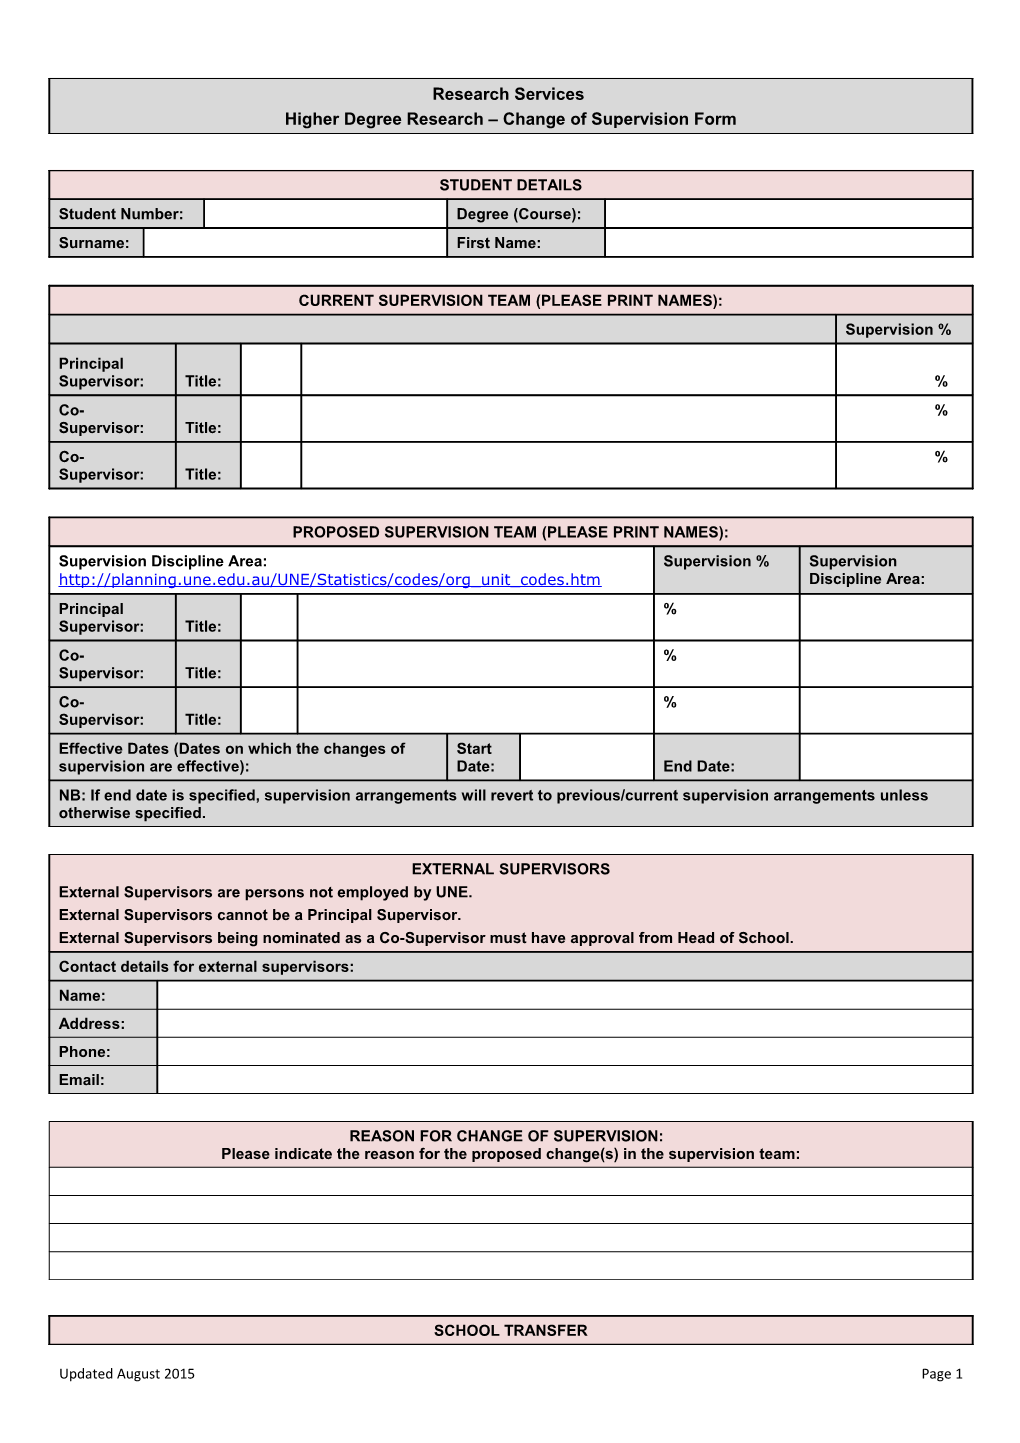 The Completed Form Can Be Submitted Via the Askune HDR Student Interface